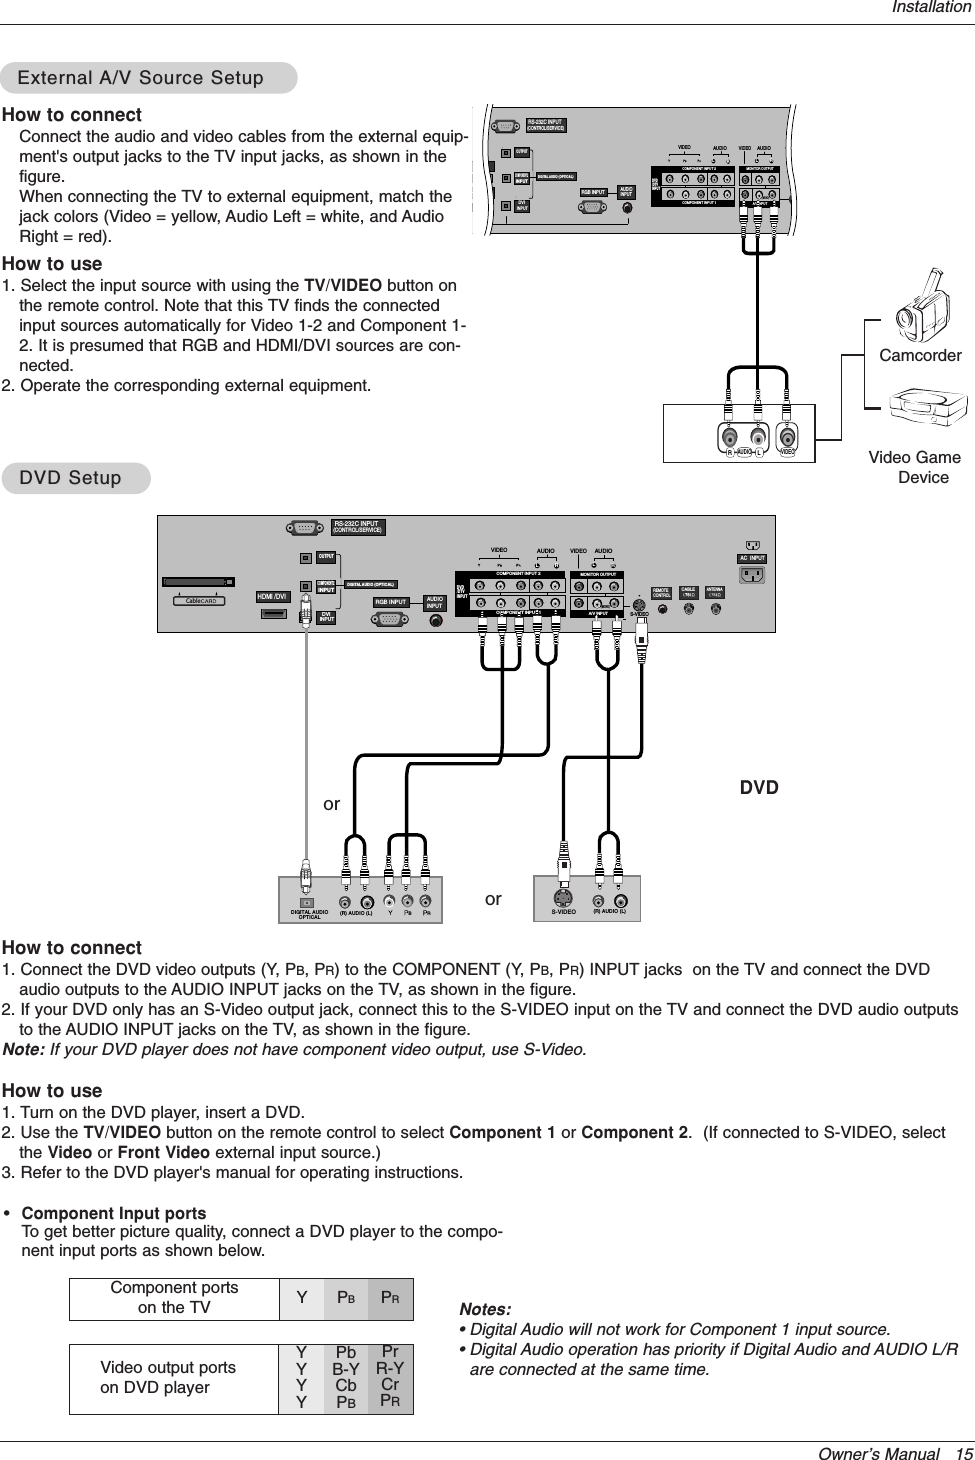 Owner’s Manual   15Installation•Component Input portsTo get better picture quality, connect a DVD player to the compo-nent input ports as shown below.How to connectConnect the audio and video cables from the external equip-ment&apos;s output jacks to the TV input jacks, as shown in thefigure. When connecting the TV to external equipment, match thejack colors (Video = yellow, Audio Left = white, and AudioRight = red).How to use1. Select the input source with using the TV/VIDEO button onthe remote control. Note that this TV finds the connectedinput sources automatically for Video 1-2 and Component 1-2. It is presumed that RGB and HDMI/DVI sources are con-nected.2. Operate the corresponding external equipment.Component ports on the TV YPBPRVideo output ports on DVD playerYYYYPbB-YCbPBPrR-YCrPRHow to connect1. Connect the DVD video outputs (Y, PB, PR) to the COMPONENT (Y, PB, PR) INPUT jacks  on the TV and connect the DVDaudio outputs to the AUDIO INPUT jacks on the TV, as shown in the figure.2. If your DVD only has an S-Video output jack, connect this to the S-VIDEO input on the TV and connect the DVD audio outputsto the AUDIO INPUT jacks on the TV, as shown in the figure.Note: If your DVD player does not have component video output, use S-Video.How to use1. Turn on the DVD player, insert a DVD.2. Use the TV/VIDEO button on the remote control to select Component 1 or Component 2.  (If connected to S-VIDEO, selectthe Video or Front Video external input source.)3. Refer to the DVD player&apos;s manual for operating instructions.External External A/V Source SetupA/V Source SetupDVD SetupDVD SetupRS-232C INPUT(CONTROL/SERVICE)AUDIO RLDIGITAL AUDIO (OPTICAL)DVI INPUTCOMPONENT2 INPUTOUTPUTRGB INPUTVIDEO HDMI 2HDMI /DVICOMPONENT INPUT 1RL(MONO)V IDEO  SREMOTE  CONTROLCABLE ANTENNA AC  INPUTDVD  /DTVINPUTCOMPONENT INPUT 2MONITOR OUTPUTA/V INPUT VIDEO AUDIO RLAUDIO VIDEOAUDIO INPUTRS-232C INPUT(CONTROL/SERVICE)AUDIO RLDIGITAL AUDIO (OPTICAL)DVI INPUTCOMPONENT2 INPUTOUTPUTAUDIO INPUTRGB INPUTVIDEO HDMI /DVICOMPONENT INPUT 1RL(MONO)CABLE ANTENNA AC  INPUTDVD  /DTVINPUTCOMPONENT INPUT 2MONITOR OUTPUTA/V INPUT VIDEO AUDIO CableS-VIDEOREMOTECONTROLBR(R) AUDIO (L)DIGITAL AUDIOOPTICAL(R) AUDIO (L)S-VIDEODVDorCamcorderVideo GameDeviceNotes:• Digital Audio will not work for Component 1 input source.• Digital Audio operation has priority if Digital Audio and AUDIO L/Rare connected at the same time.or